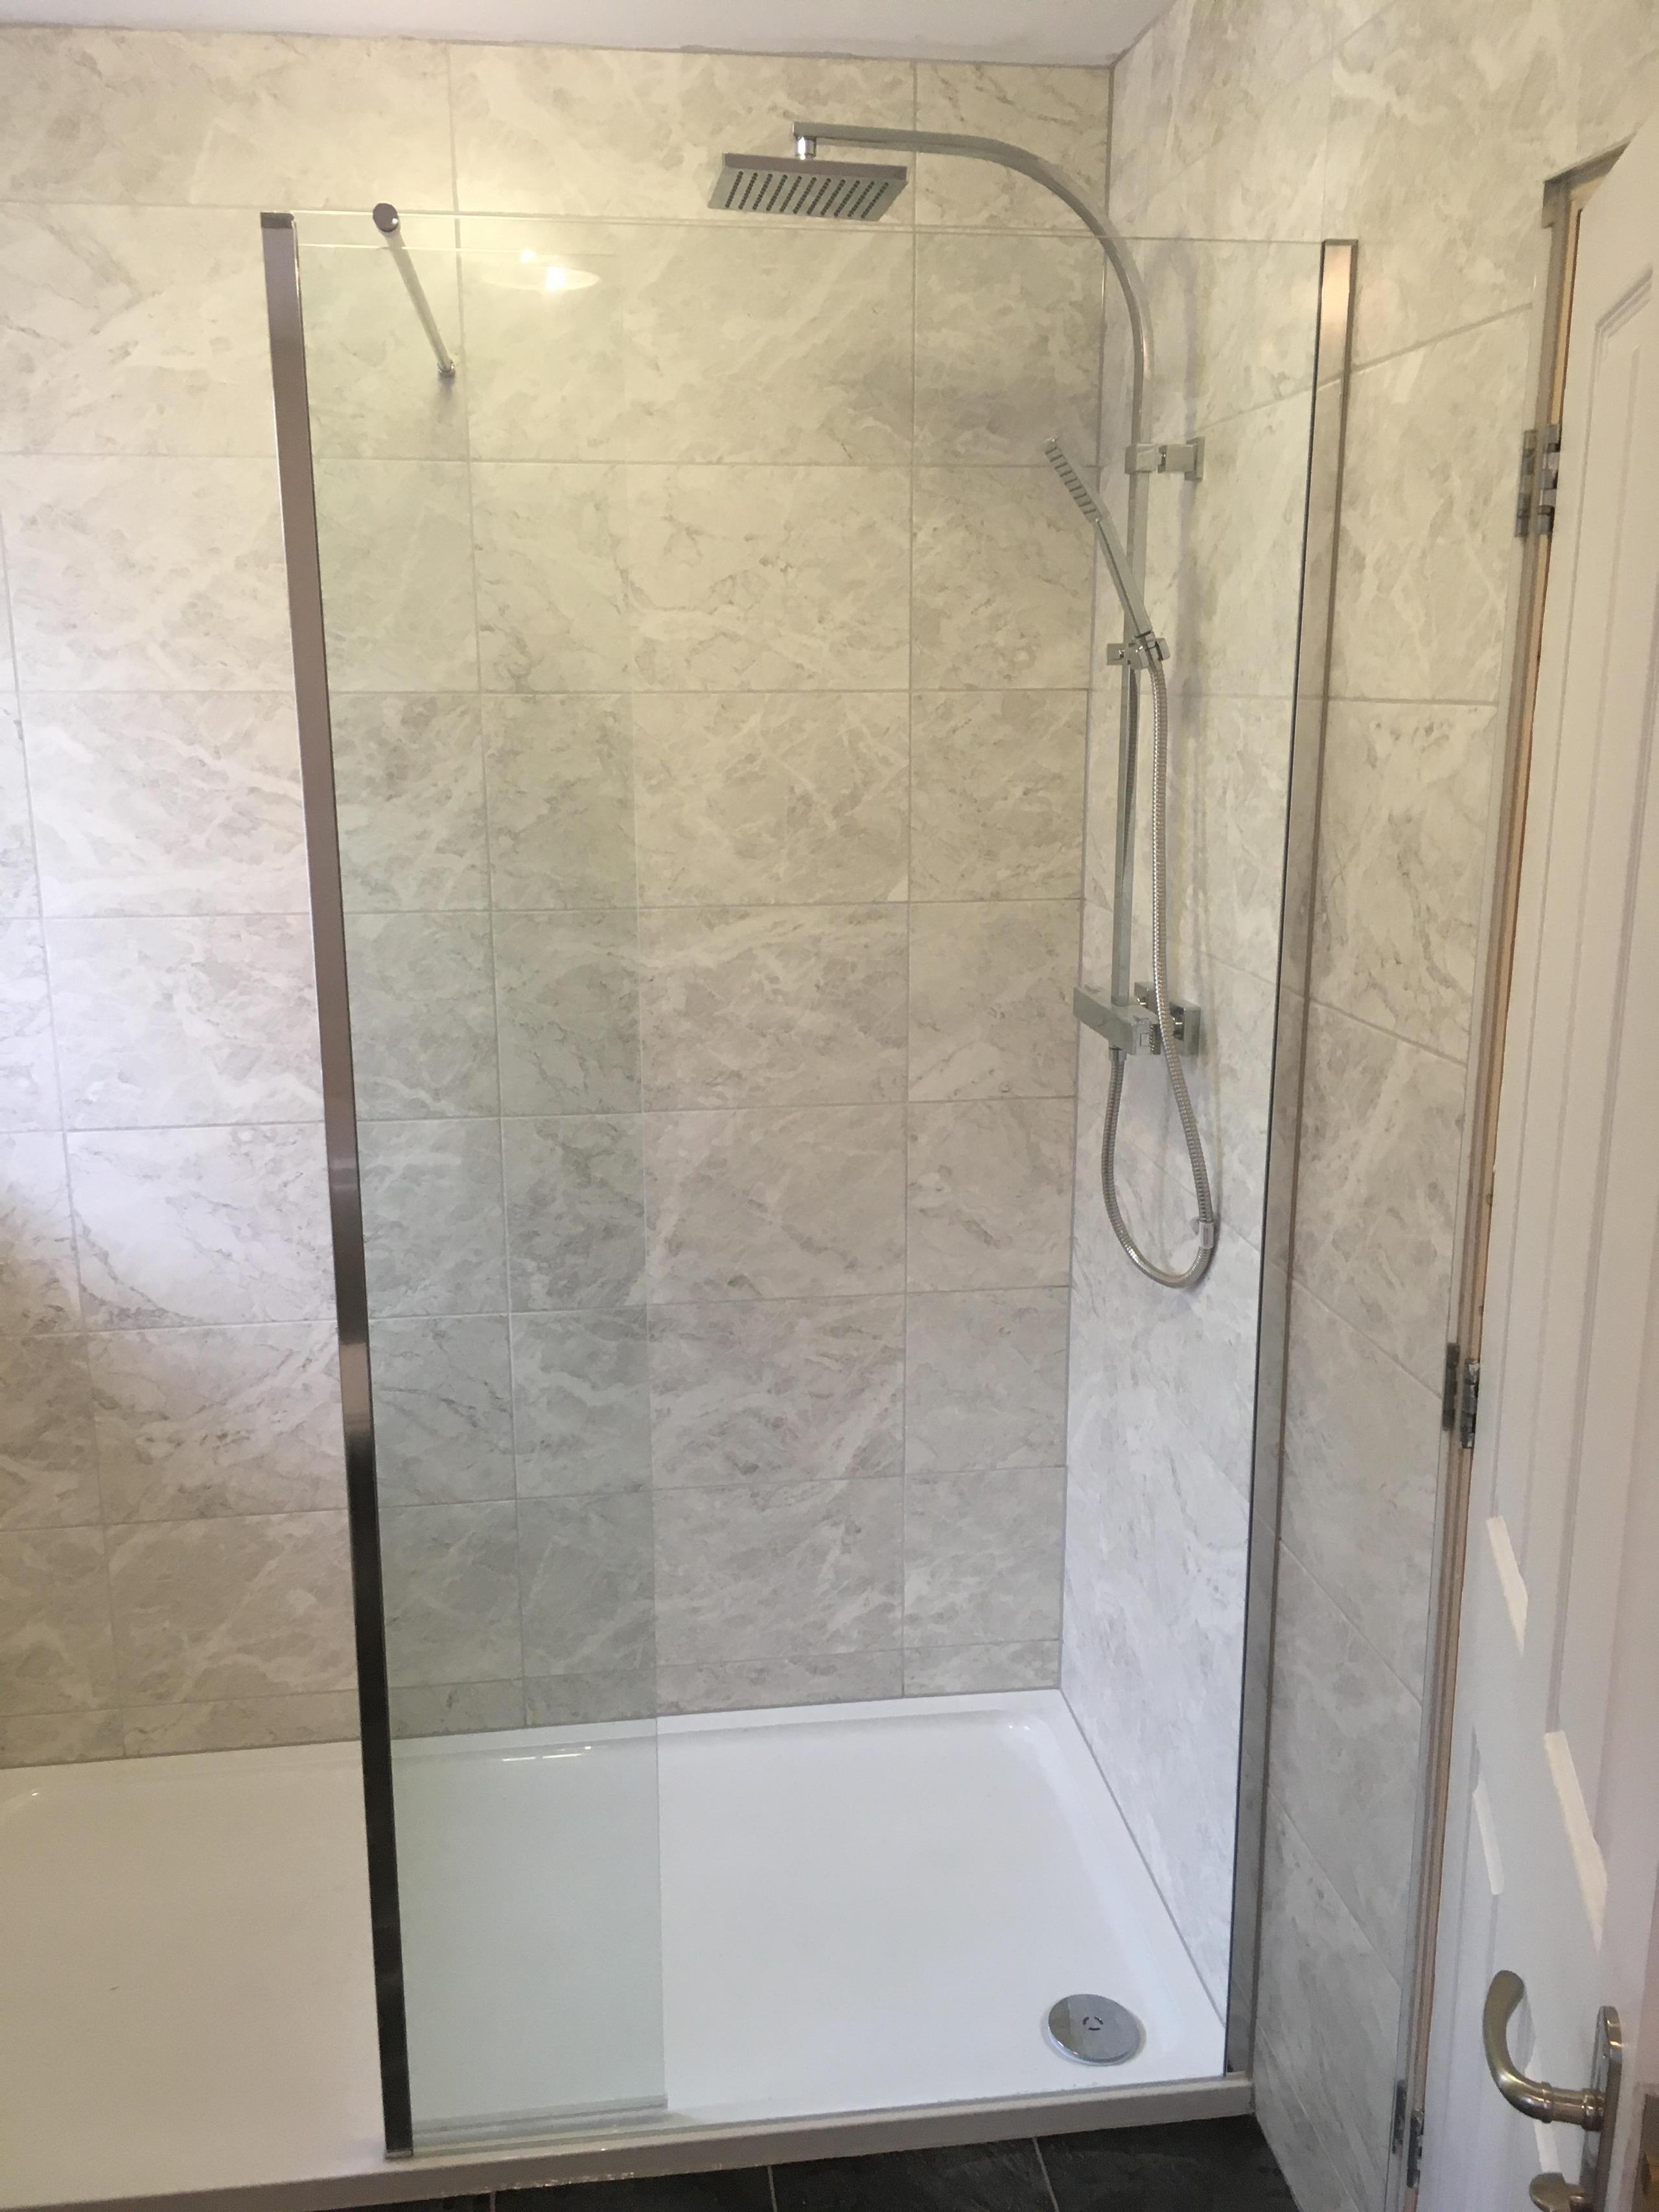 Clear glass walk in level floor shower enclosure